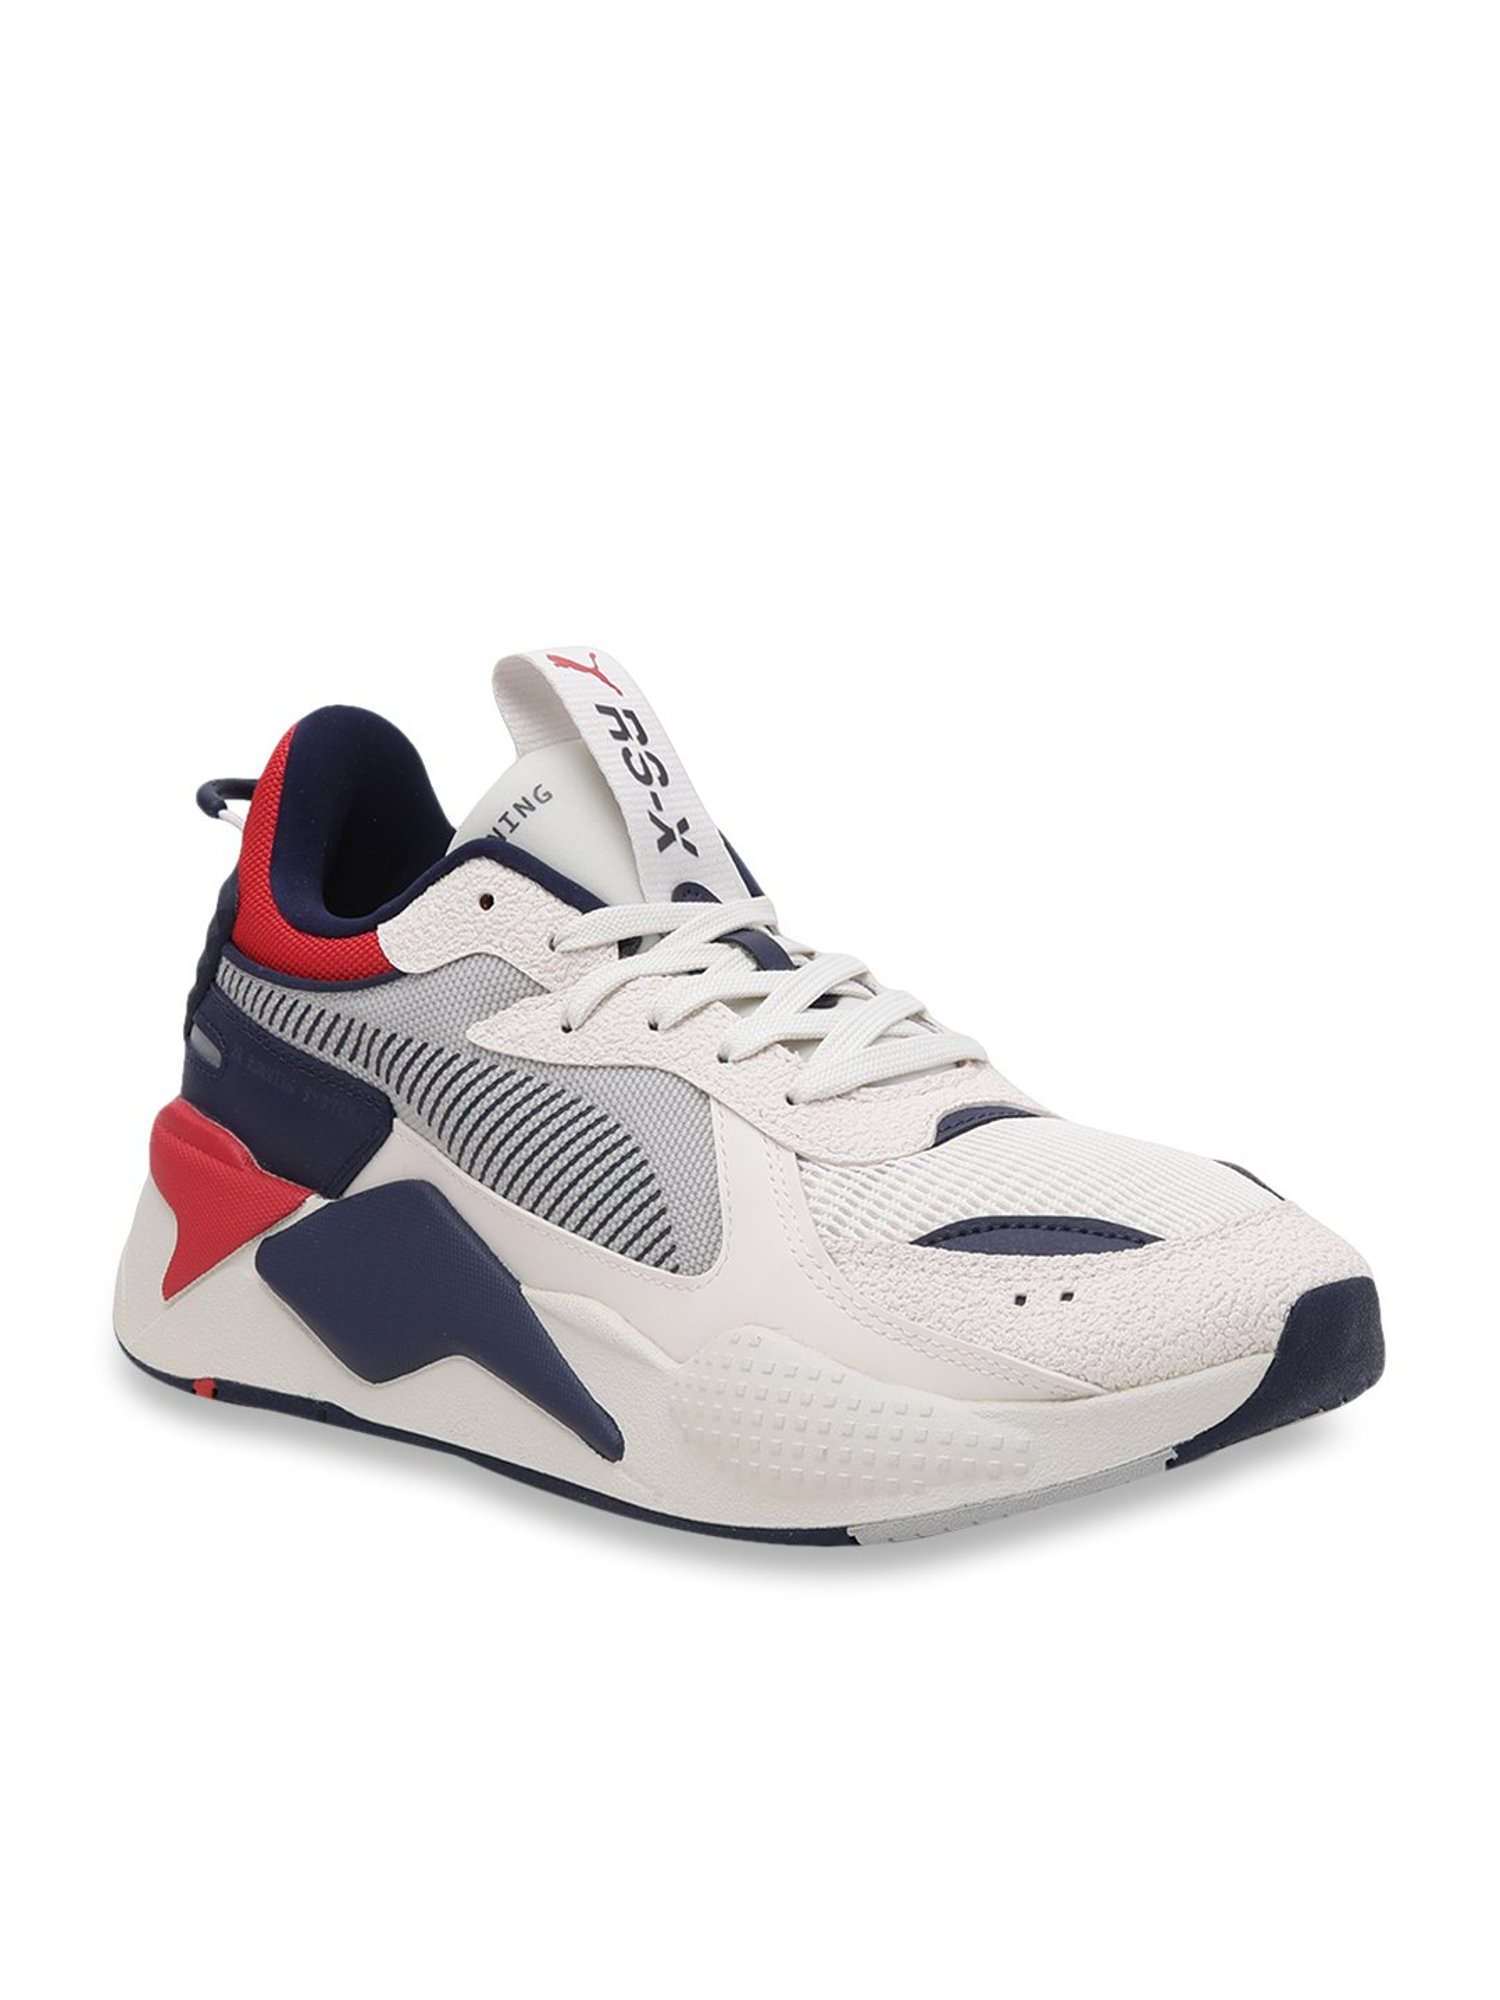 puma sports shoes at lowest price